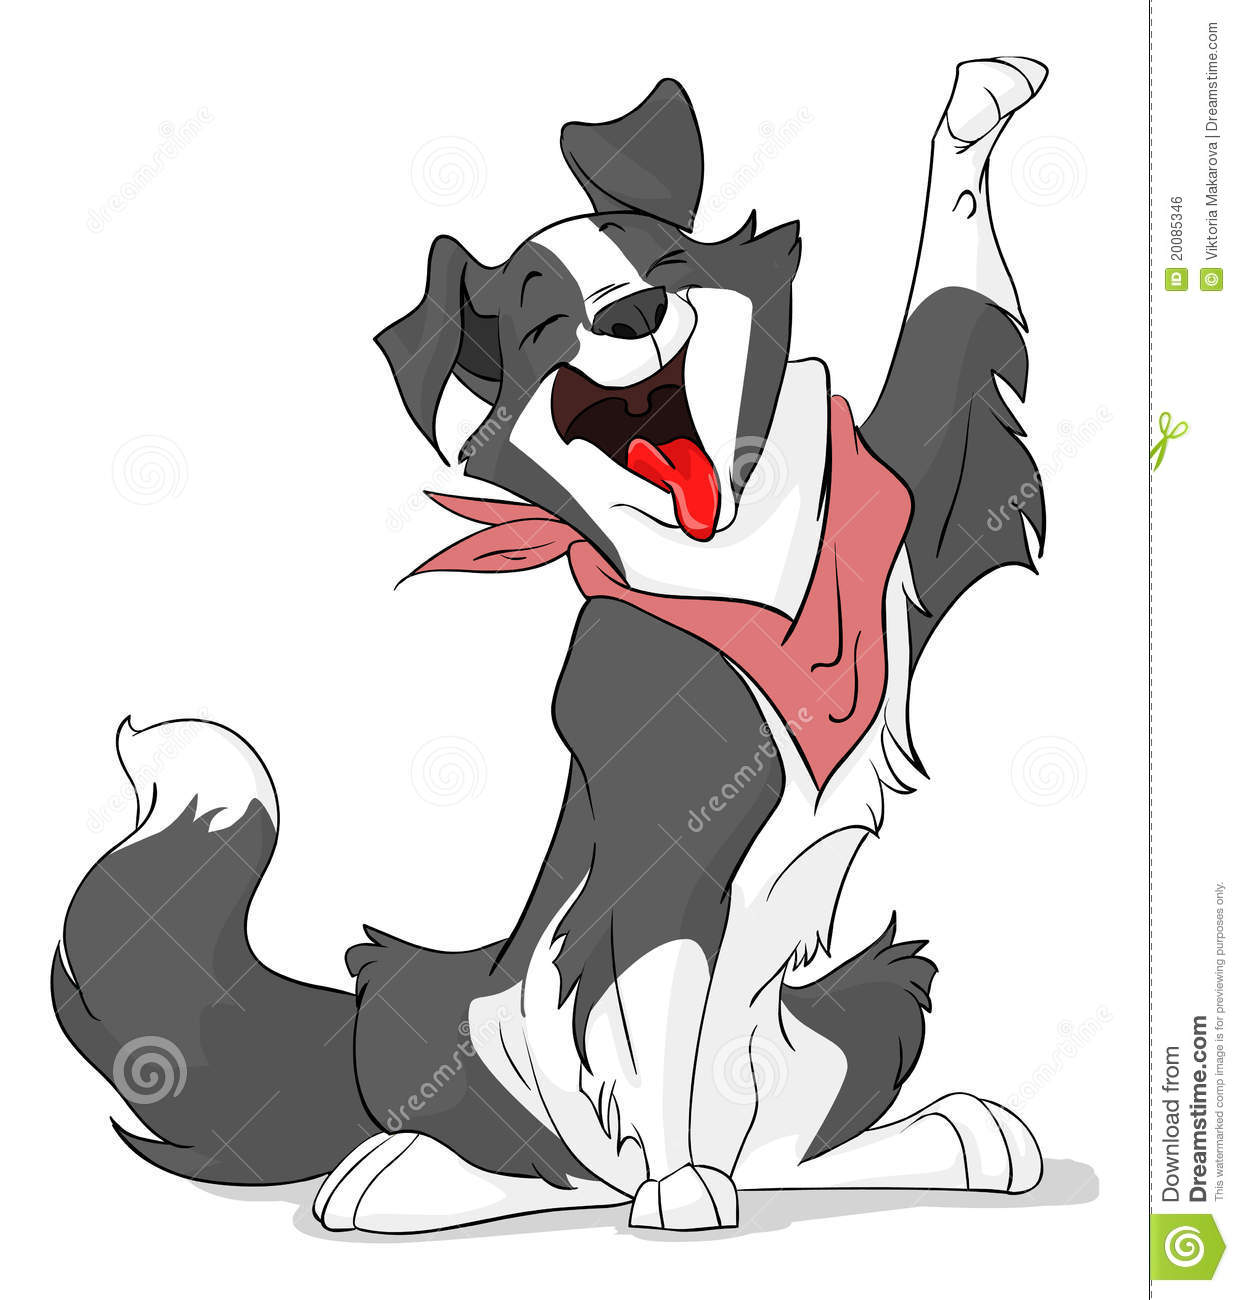 Border Collie clipart #4, Download drawings